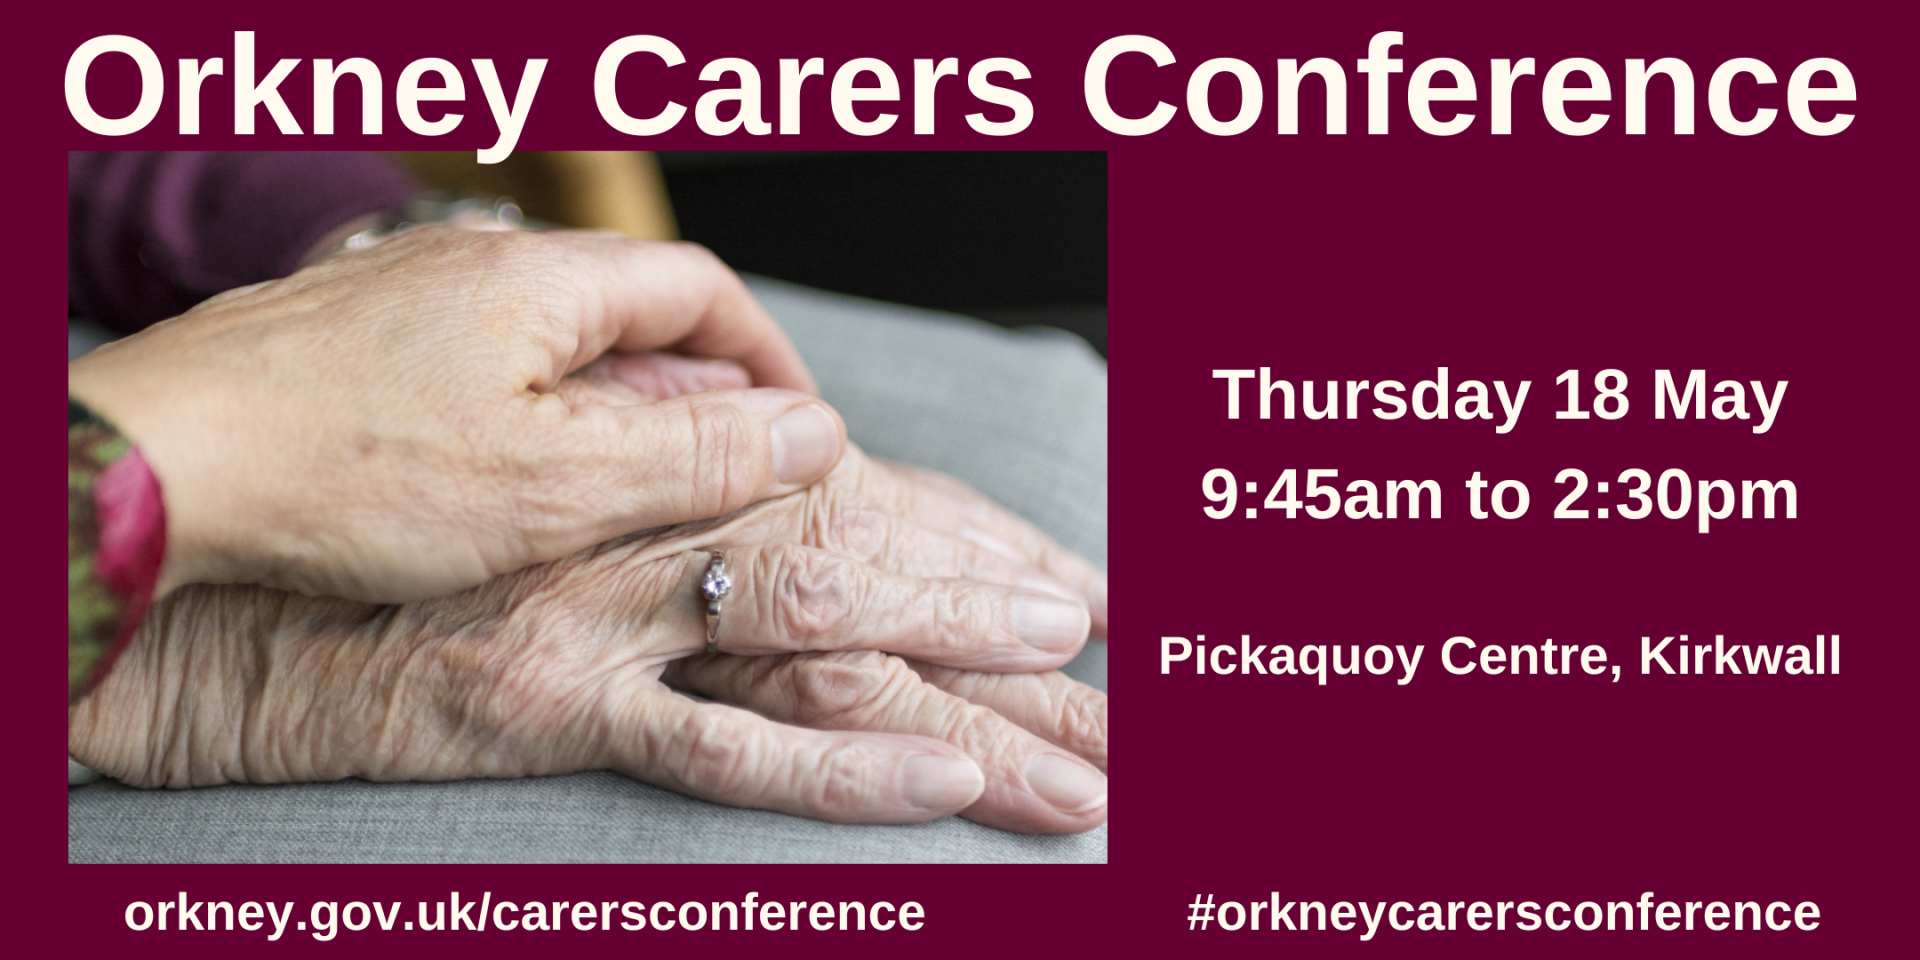 Orkney Carers Conference